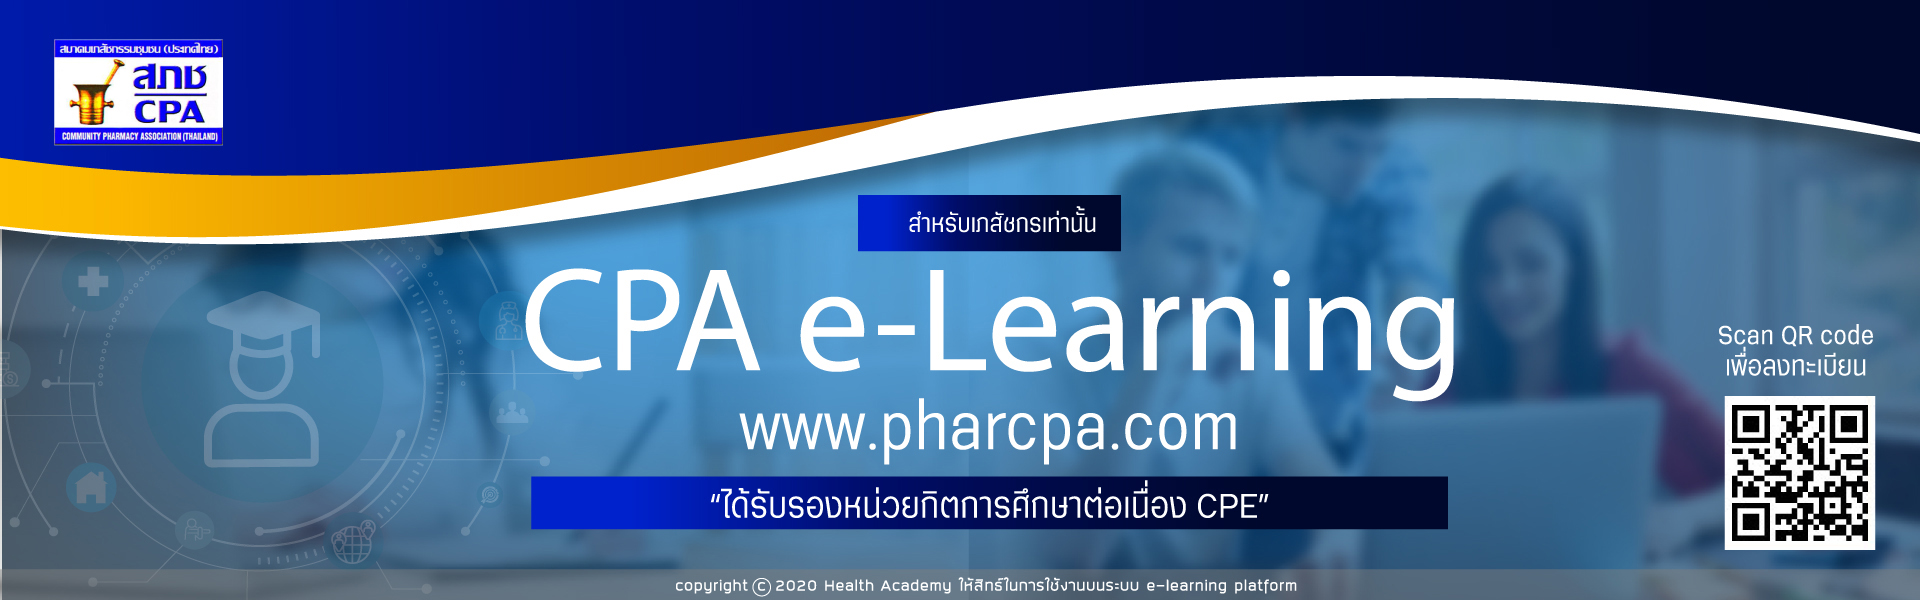 cpa elearning